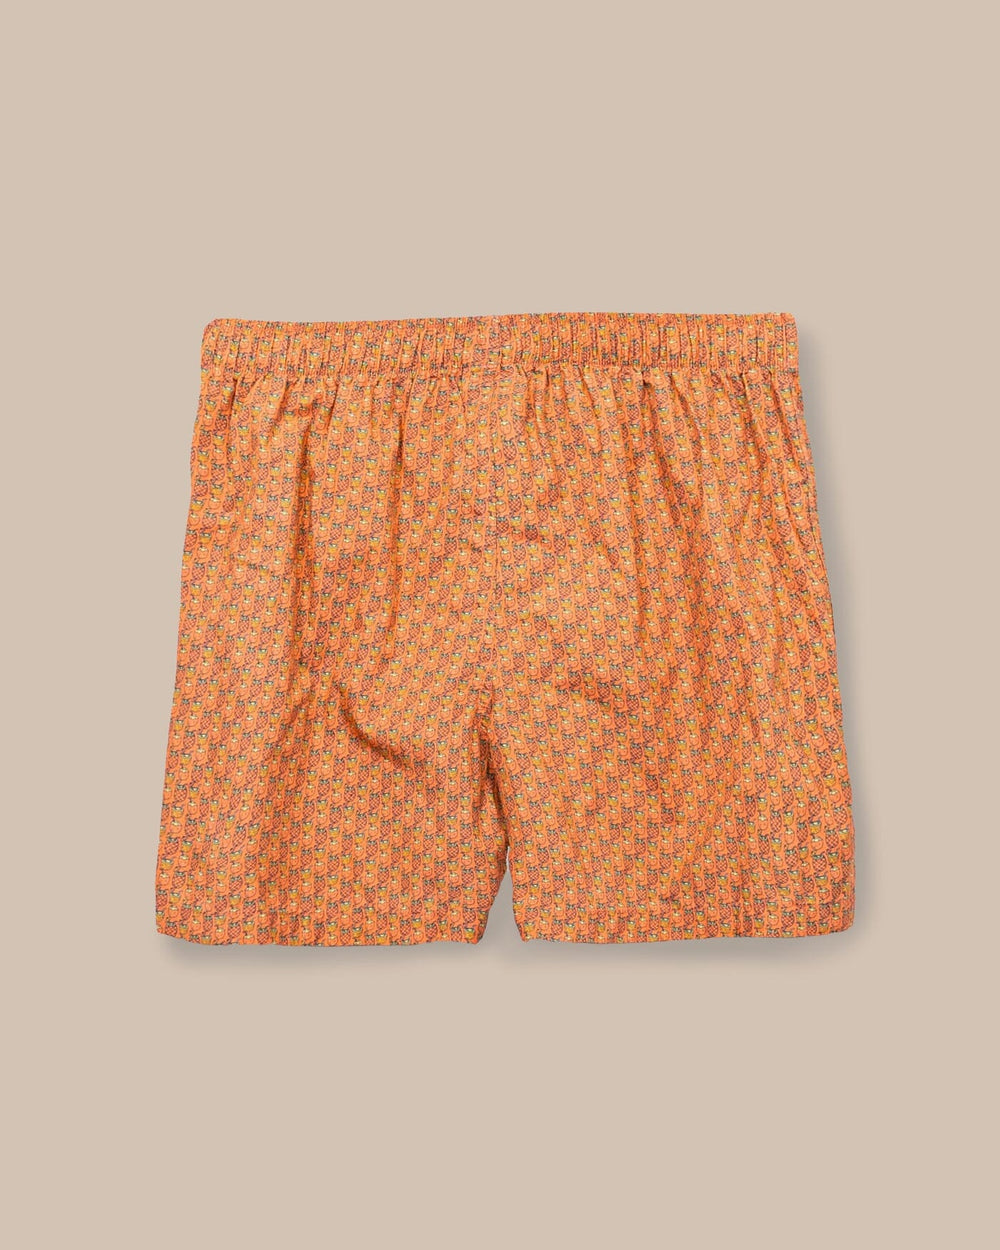 The back view of the Southern Tide Vacation Views Boxer by Southern Tide - Desert Flower Coral